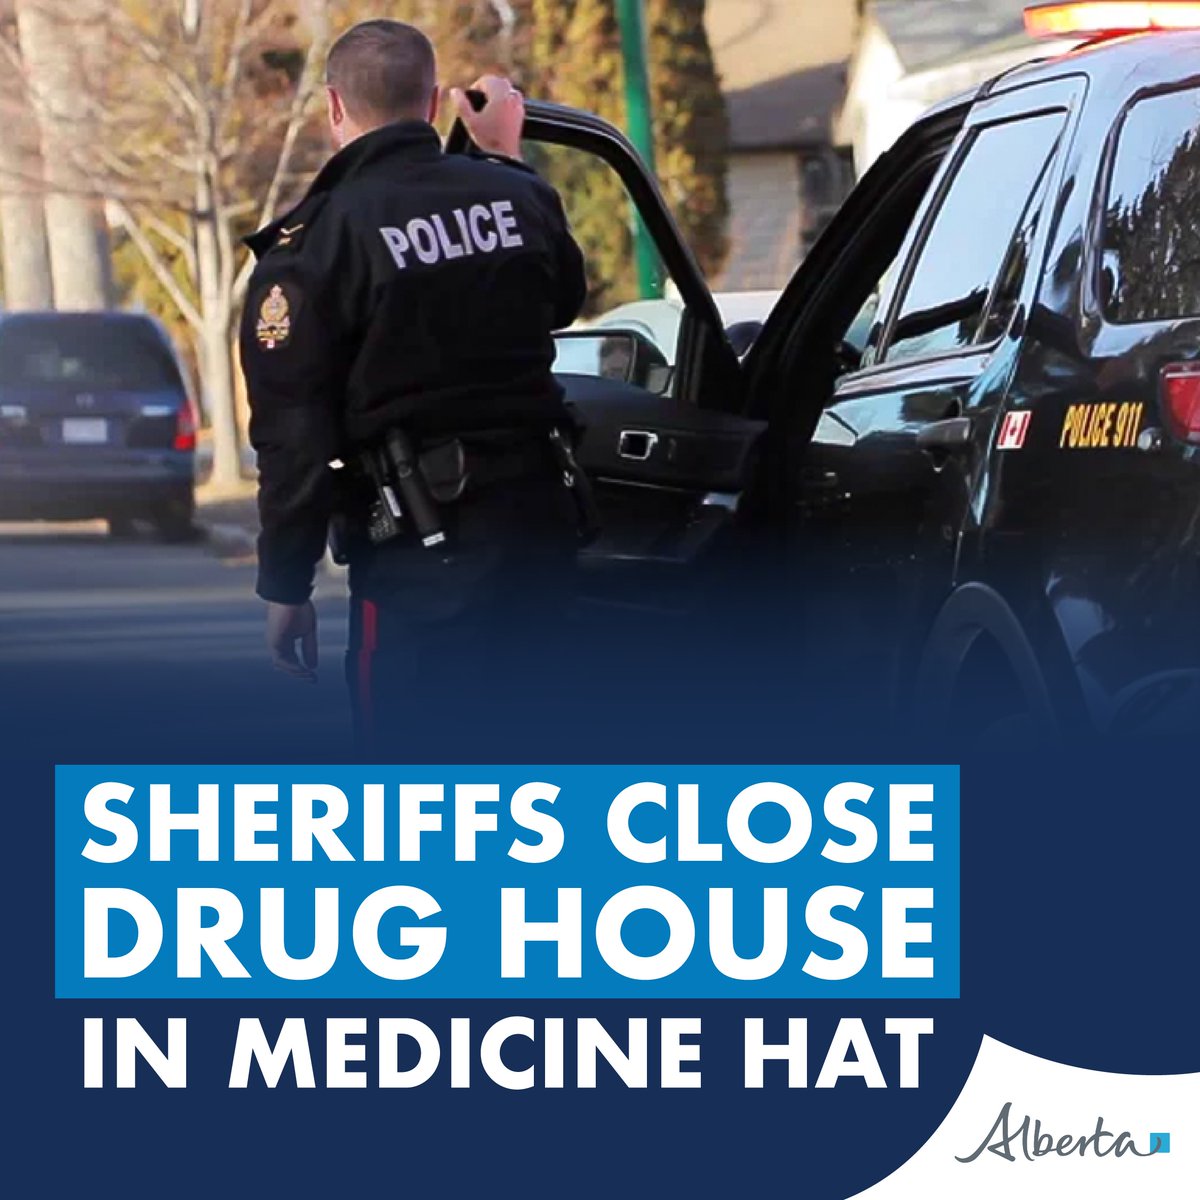 Drug dealers are not welcome in this province. Once again, the SCAN unit has played a crucial role in addressing a dangerous property and ensuring the safety of Albertans and their communities. The southern Alberta SCAN team is providing residents with the peace of mind they